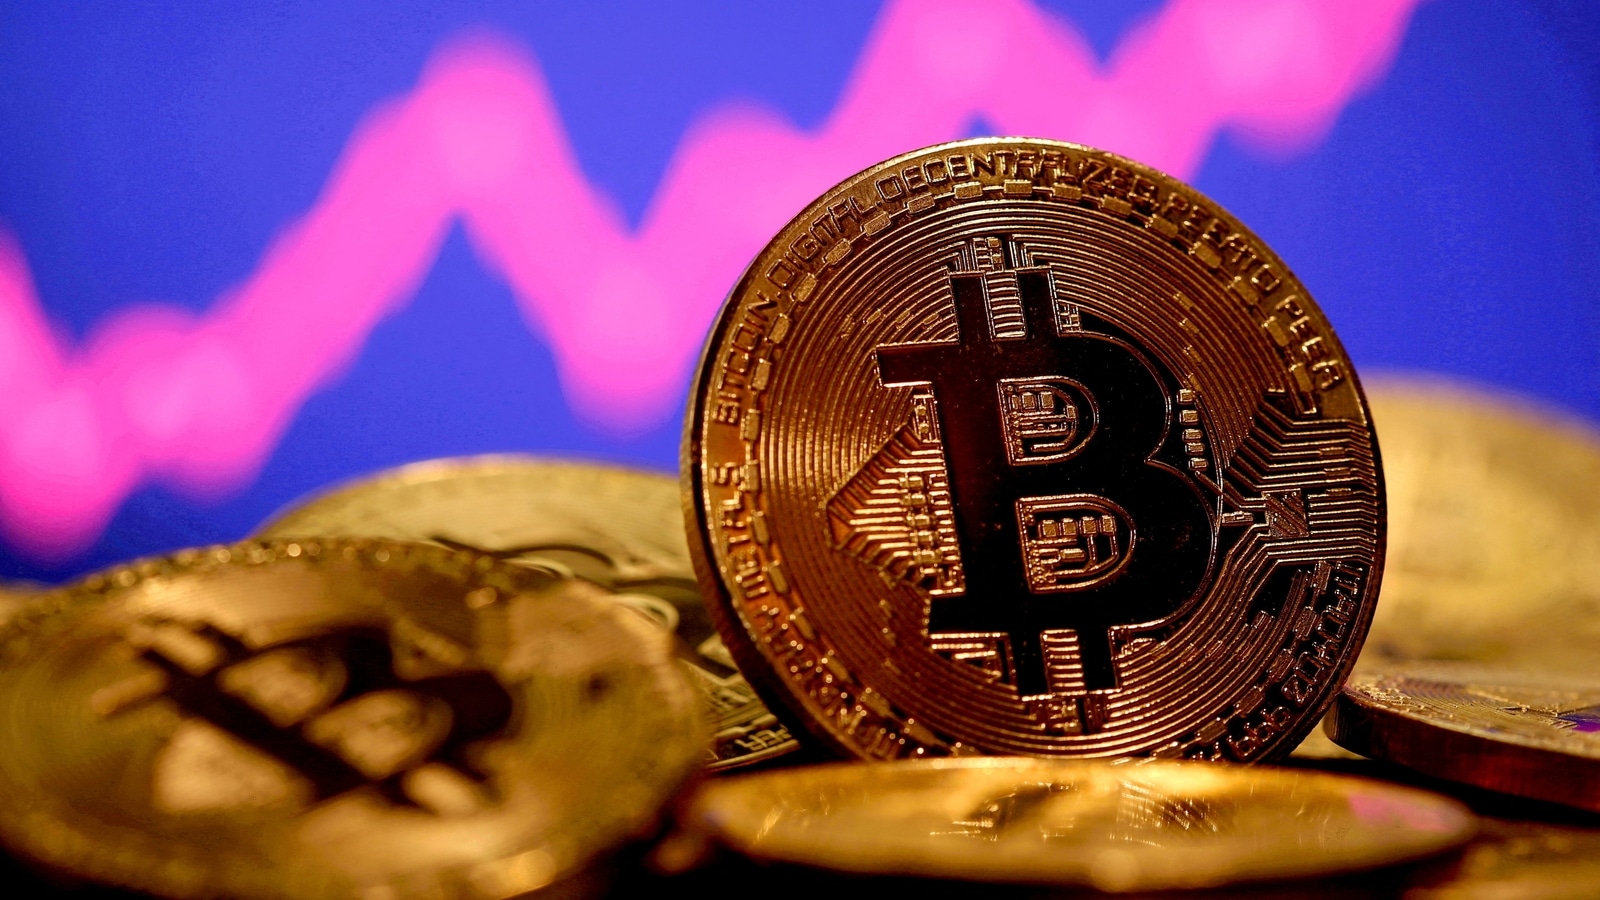 Bitcoin Perpetuals set to become an even bigger price driver